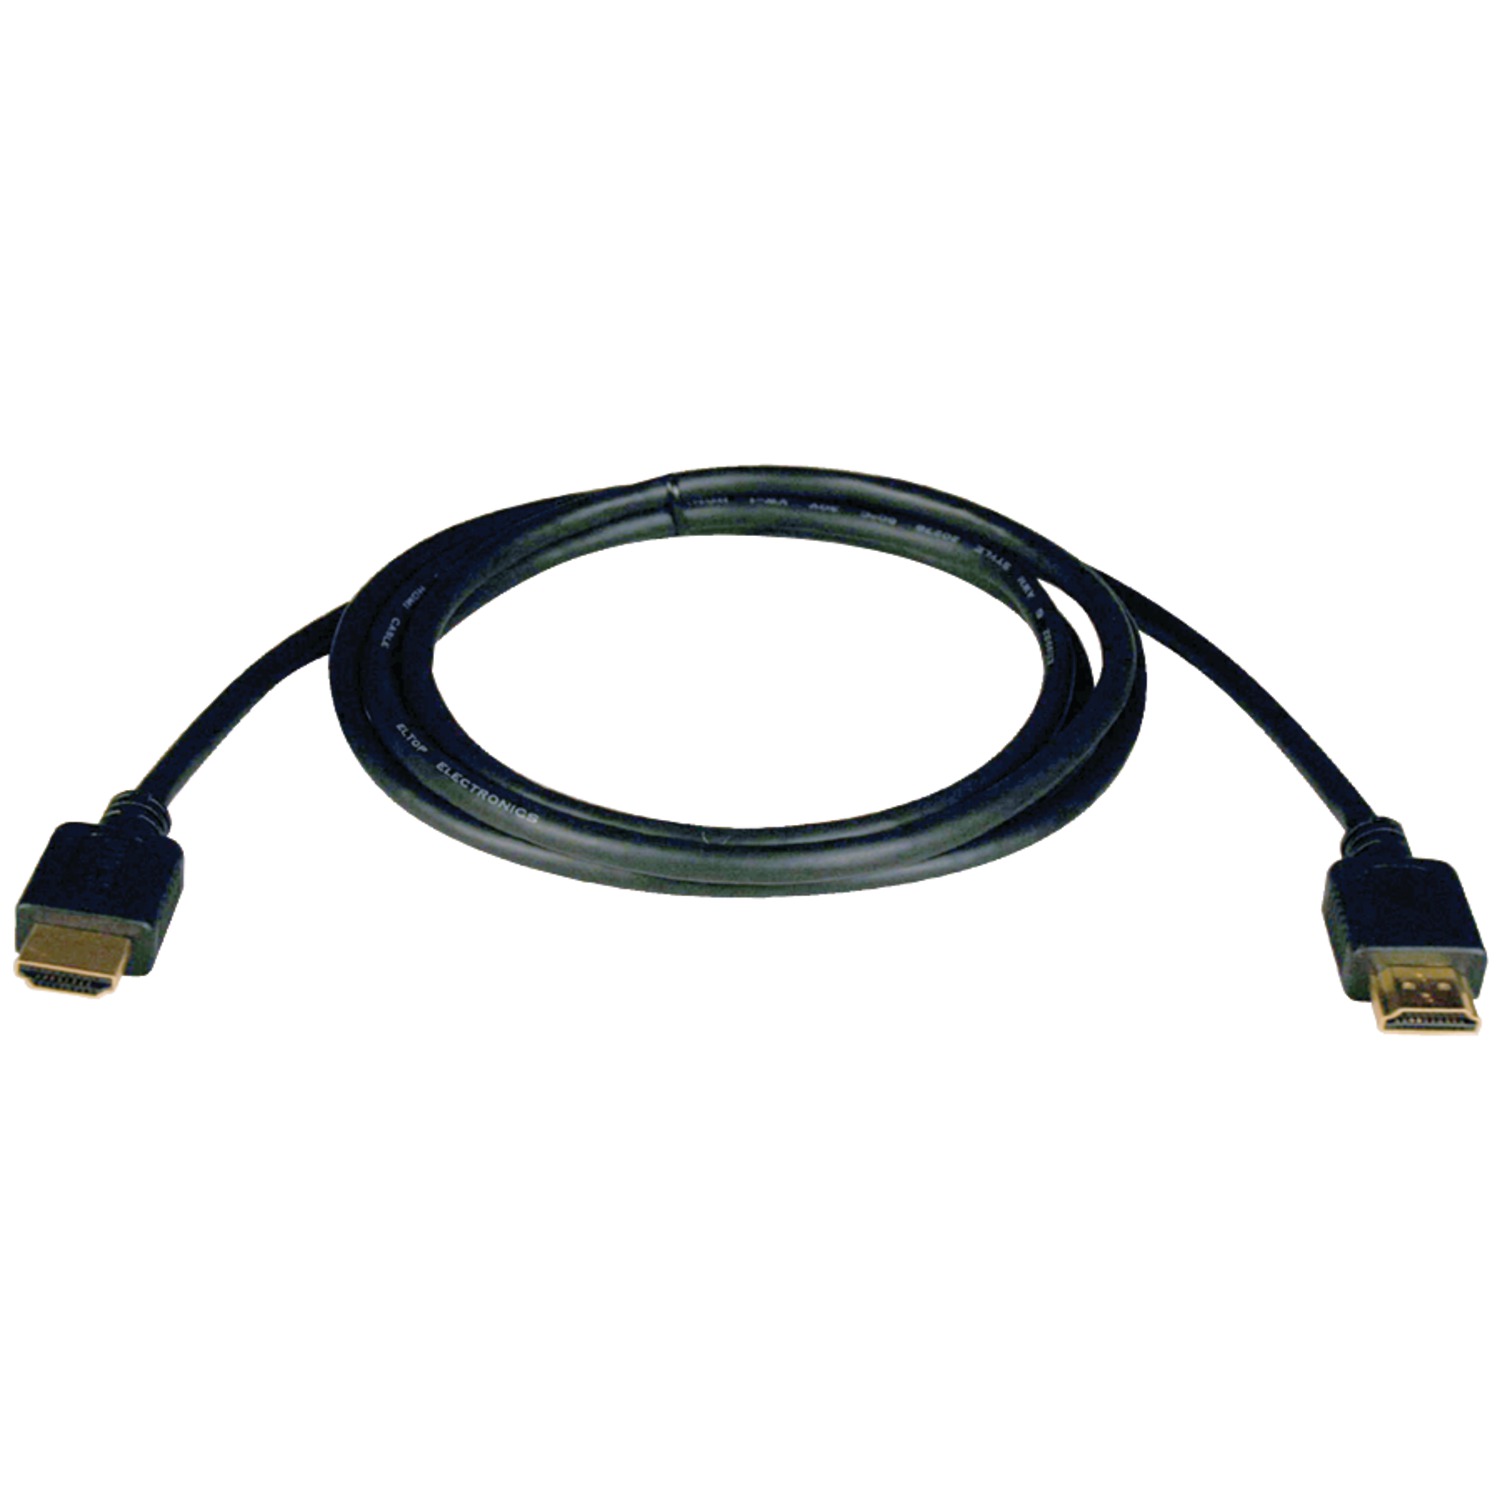 Tripp Lite High Speed HDMI Cable, Ultra HD 4K x 2K - Black 6-FT (P568-006) - image 3 of 3